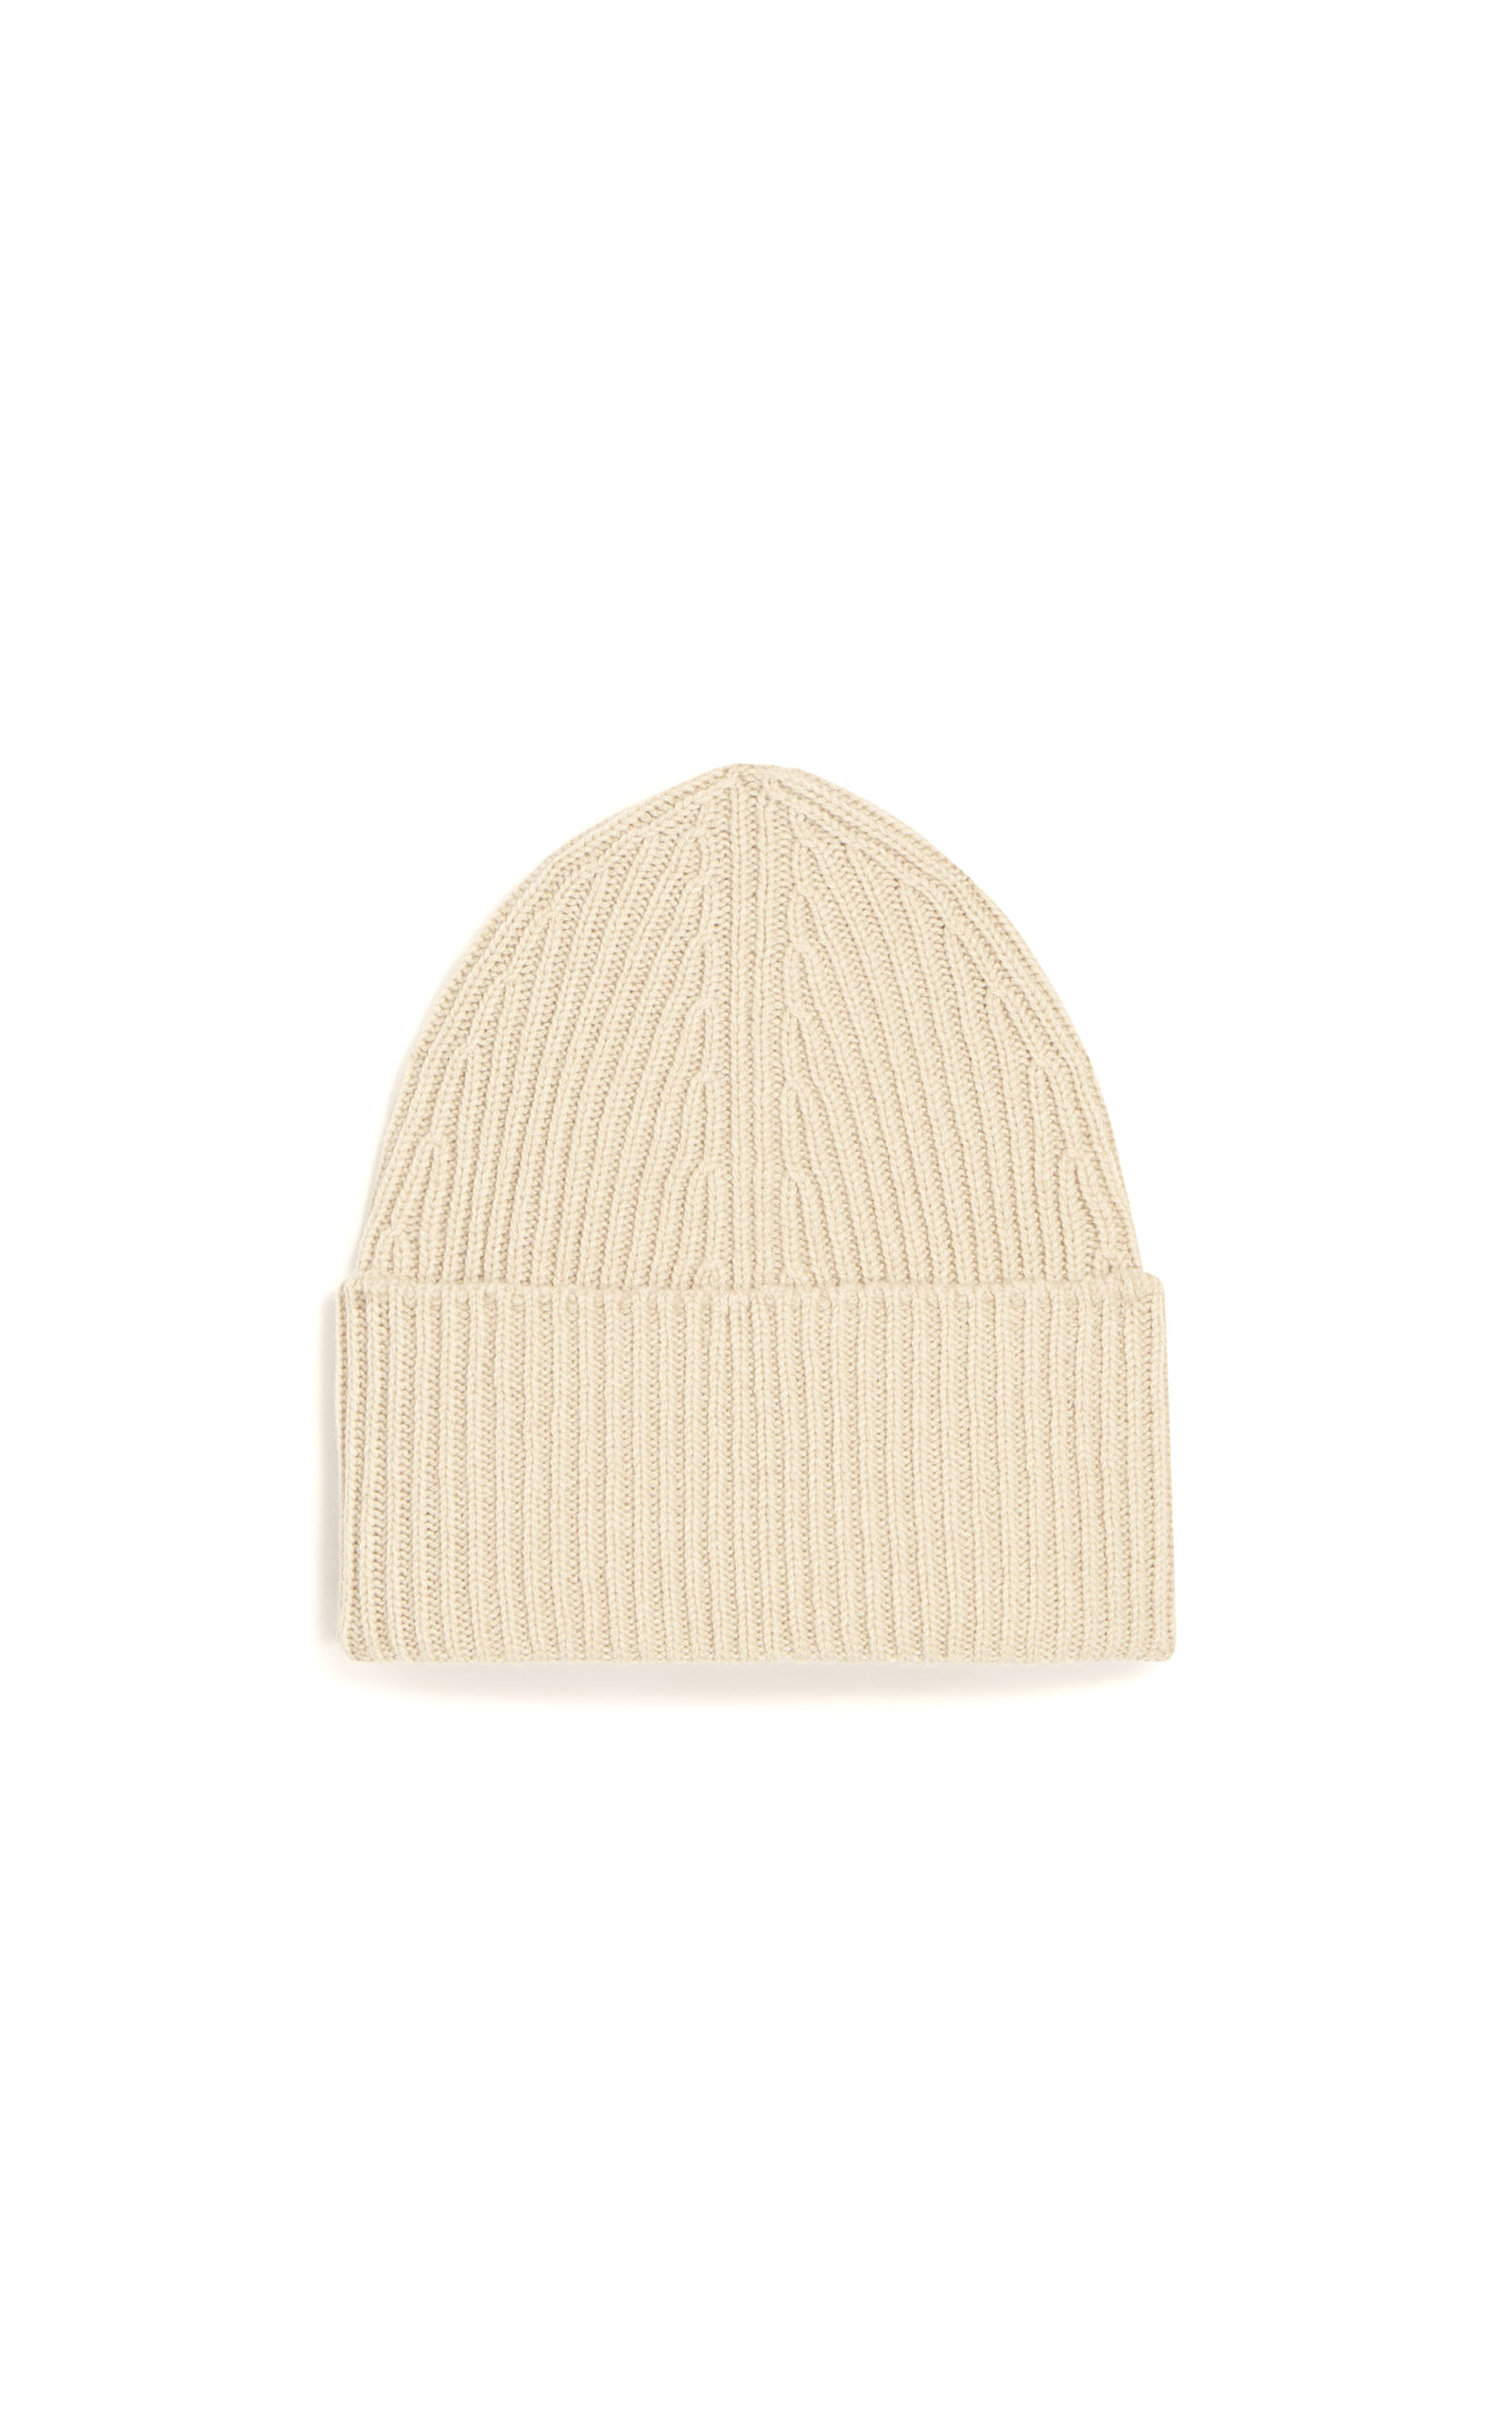 ANT175 CASHMERE HAT A